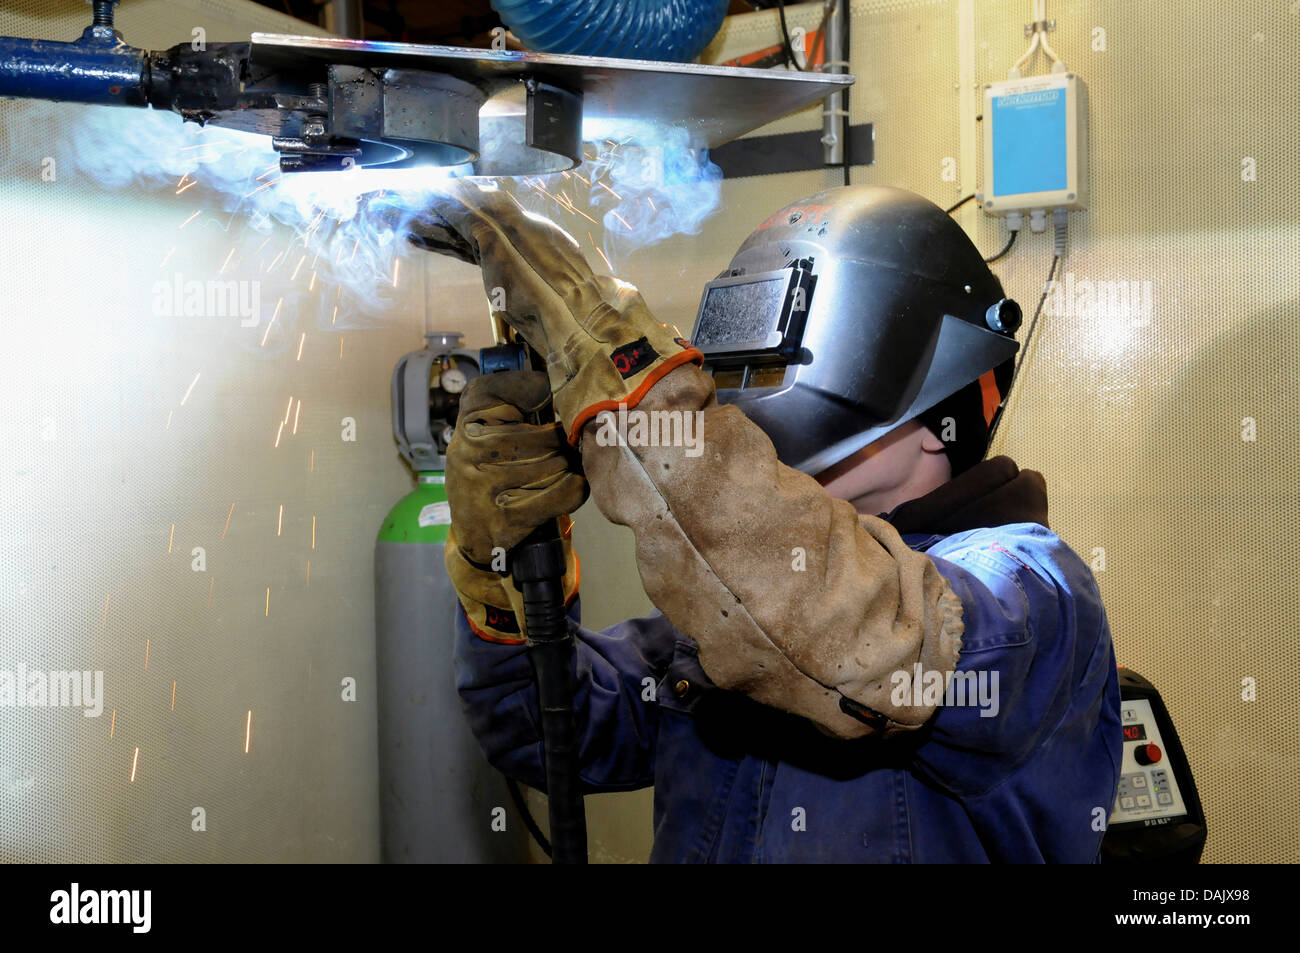 Man welding at a vocational school Stock Photo